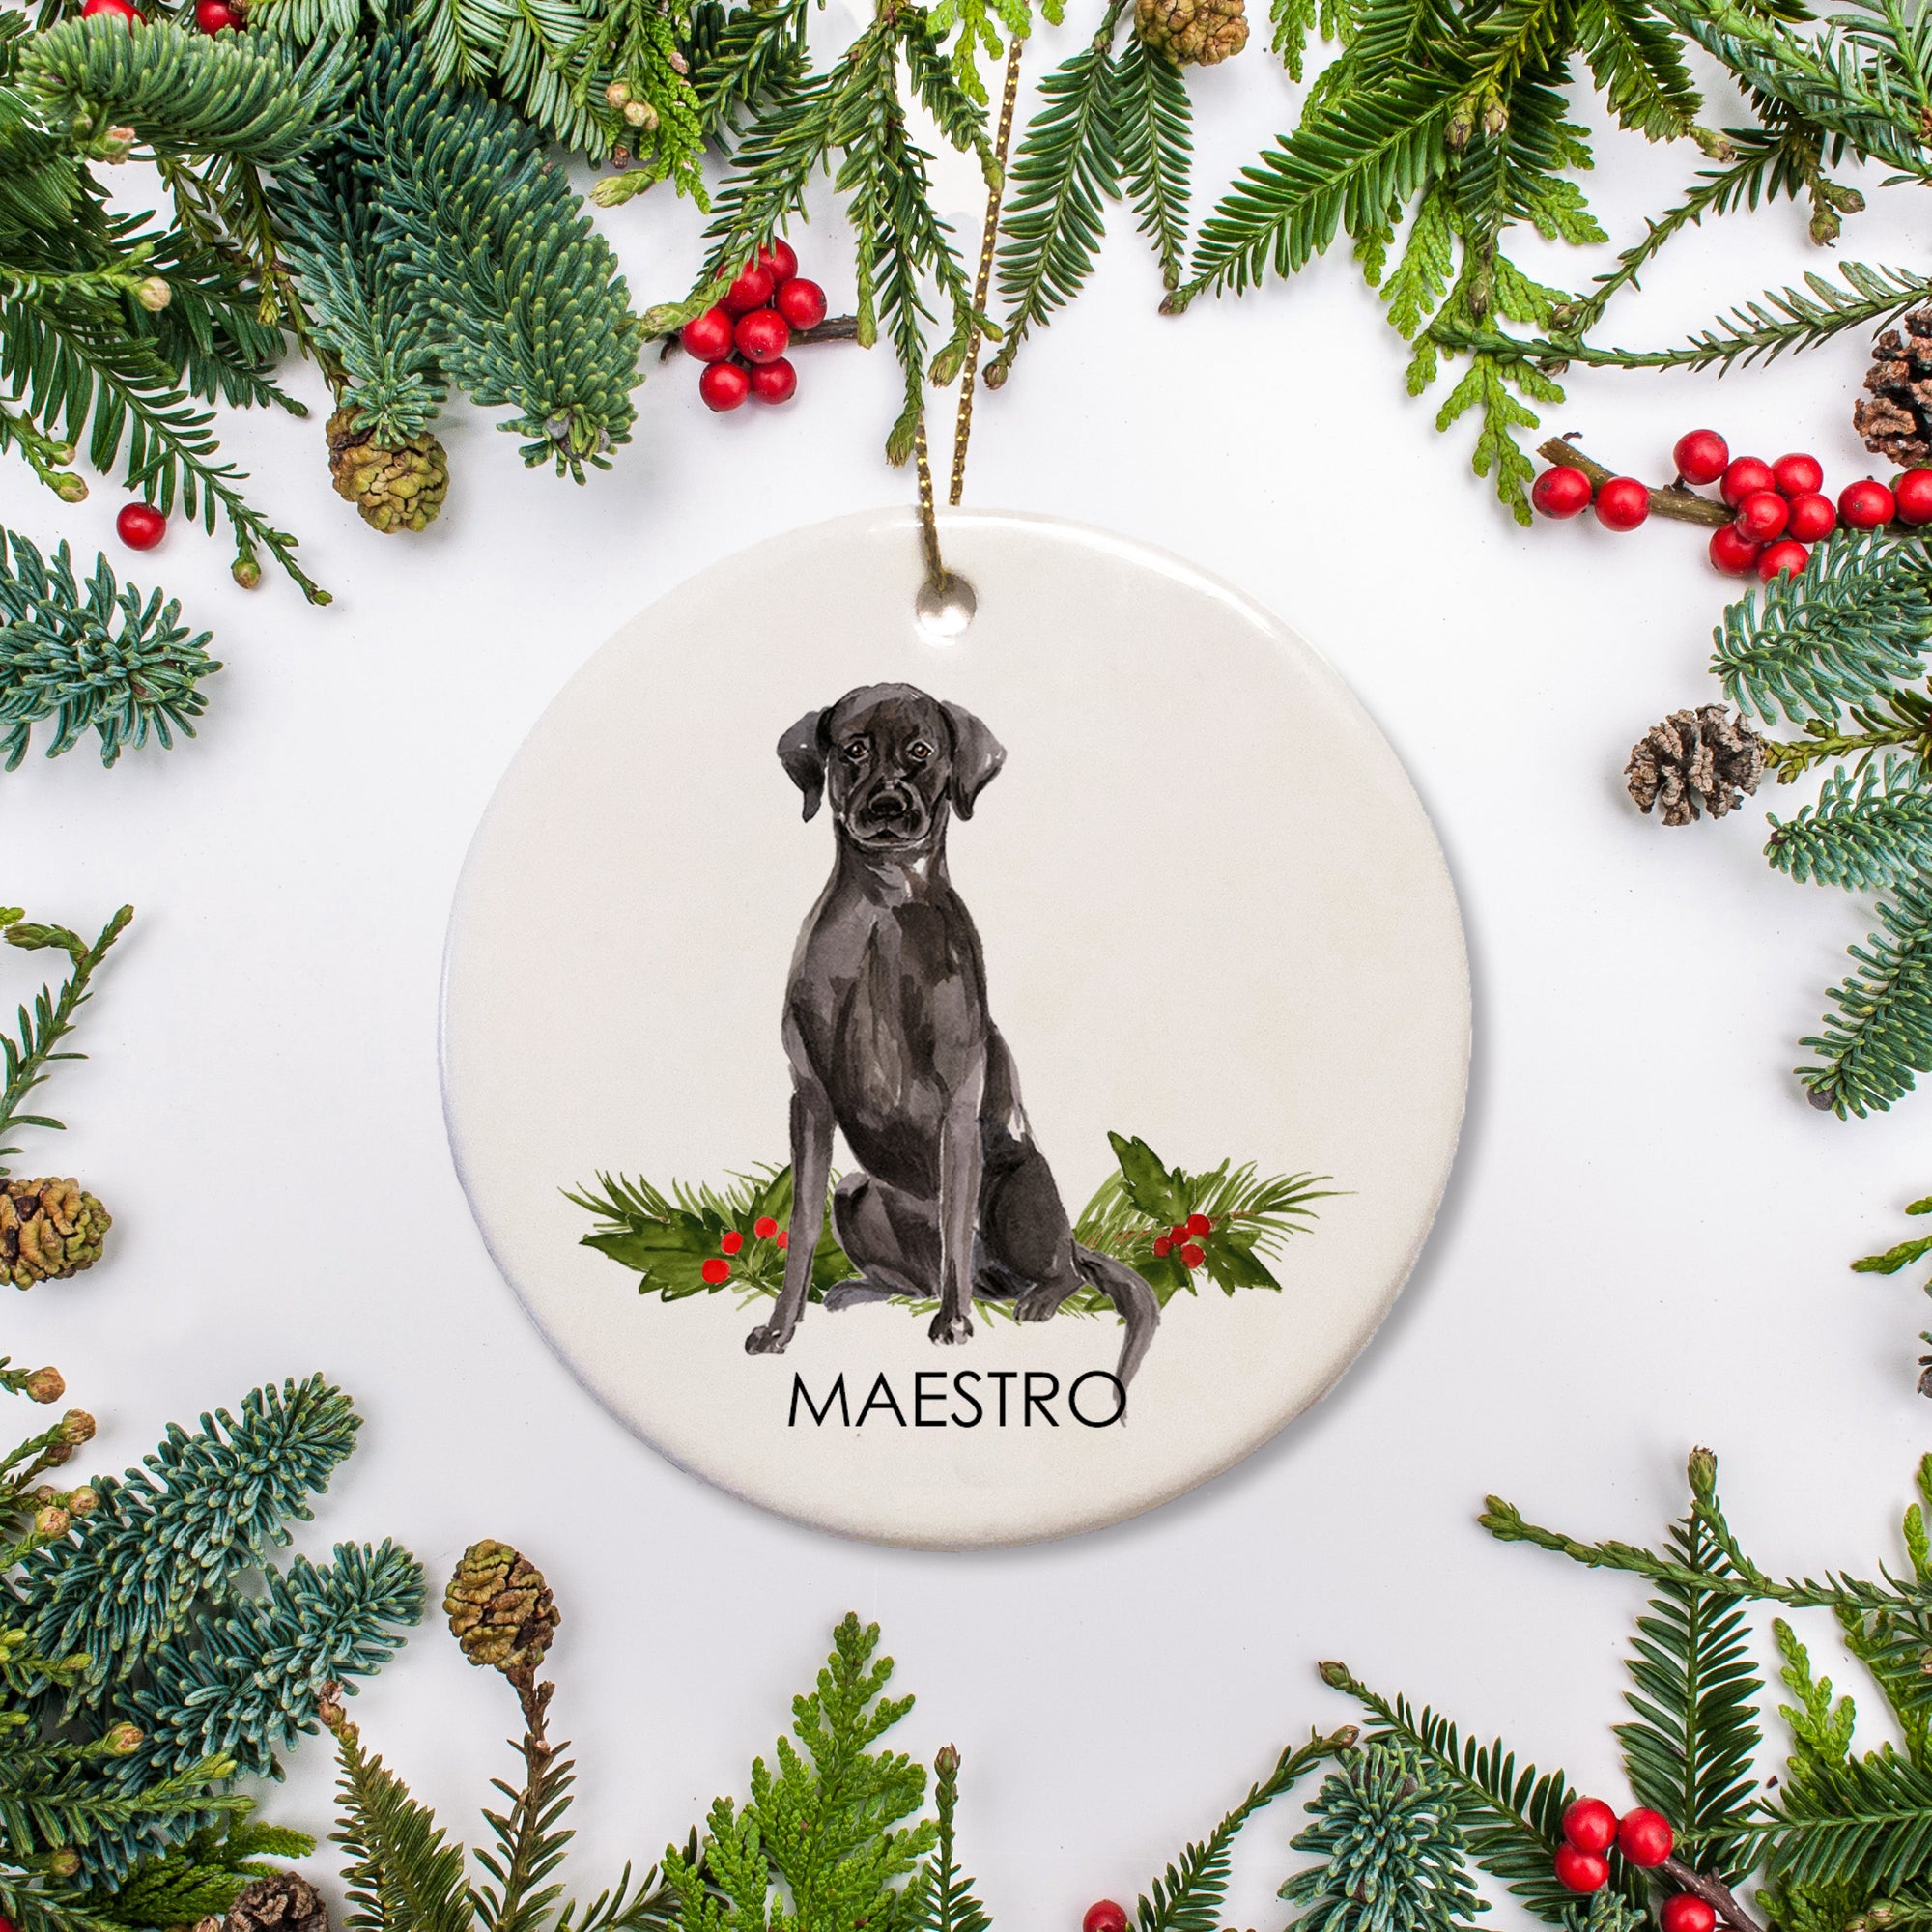 <p><span>This personalized Christmas ornament features a Black Labrador Retriever sitting on a bed of holly. You can even add a date or special message on the back of the ornament.